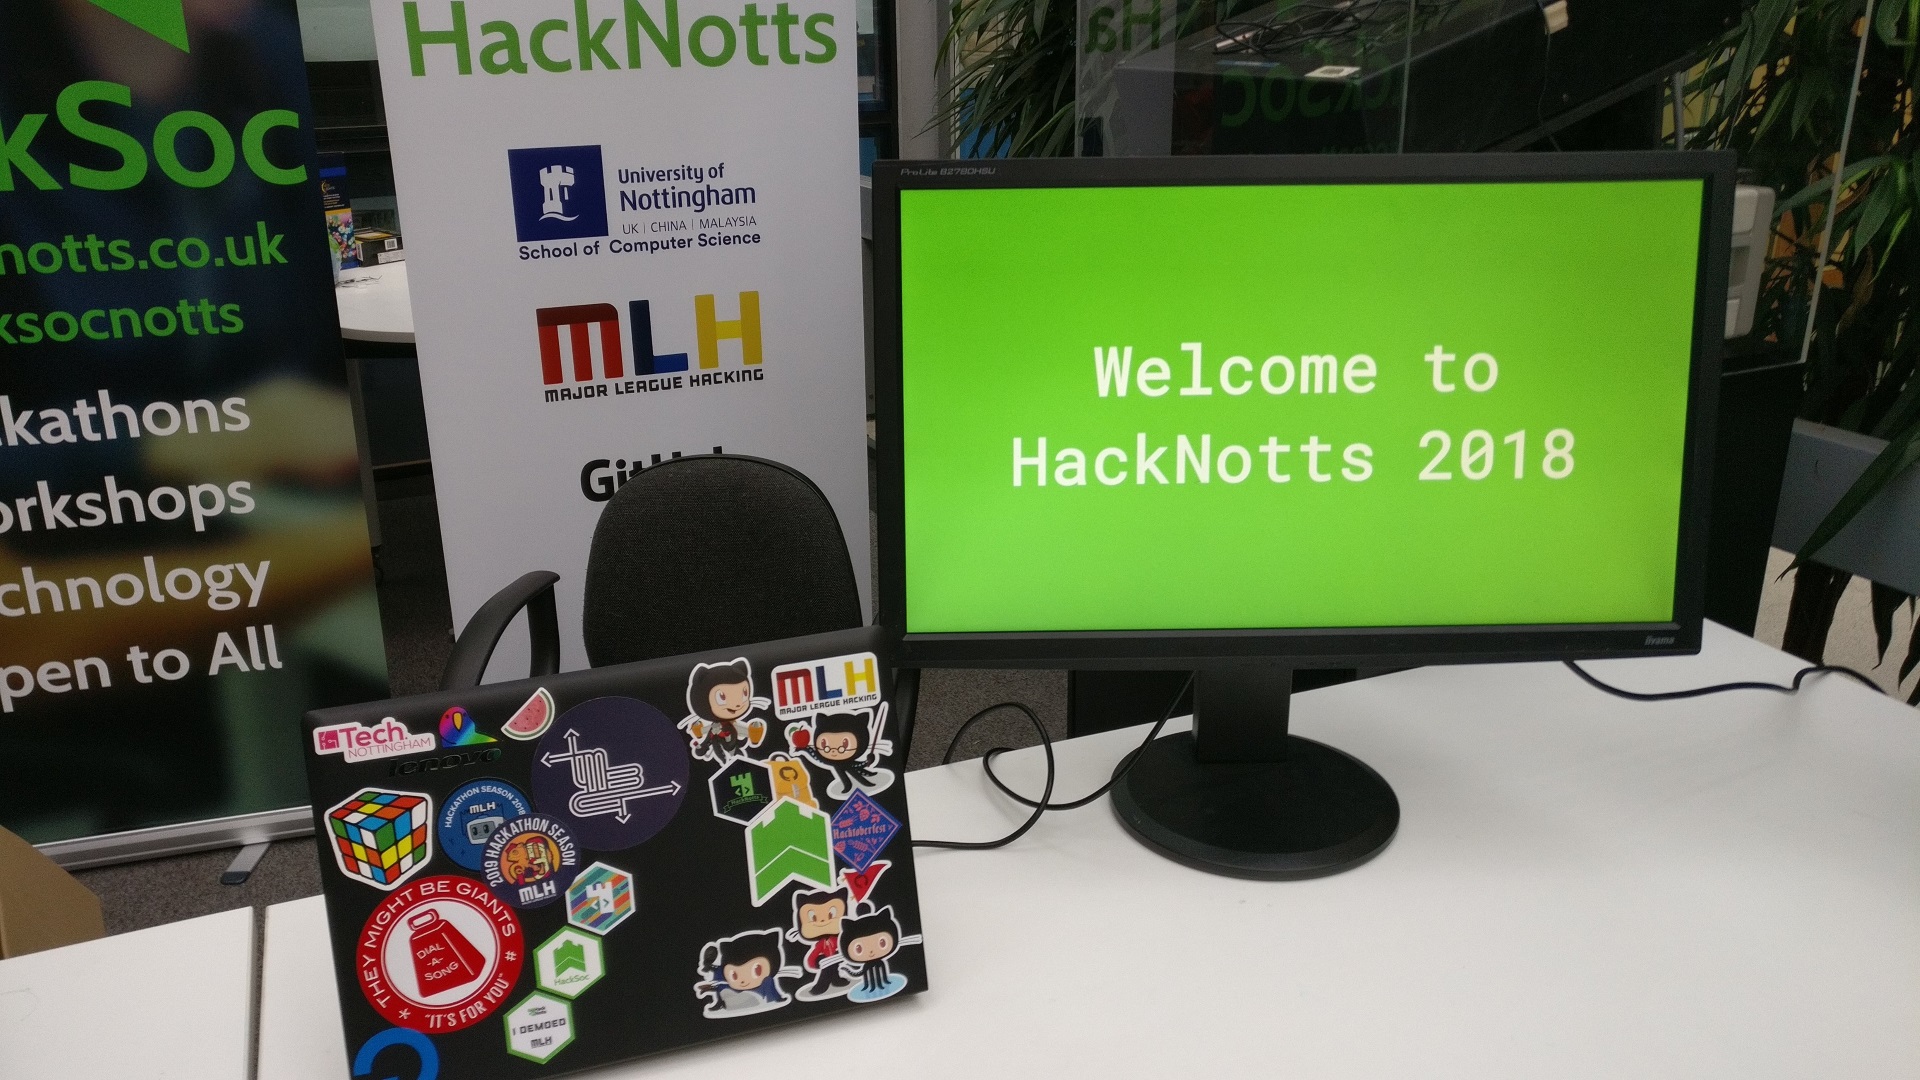 A laptop and a monitor are sat on a desk. The back of the laptop can be seen, with various programming-related stickers on the back. The monitor is facing the viewer, and on it is the text "Welcome to HackNotts 2018". In the background, some banners for HackSoc and HackNotts can be seen.